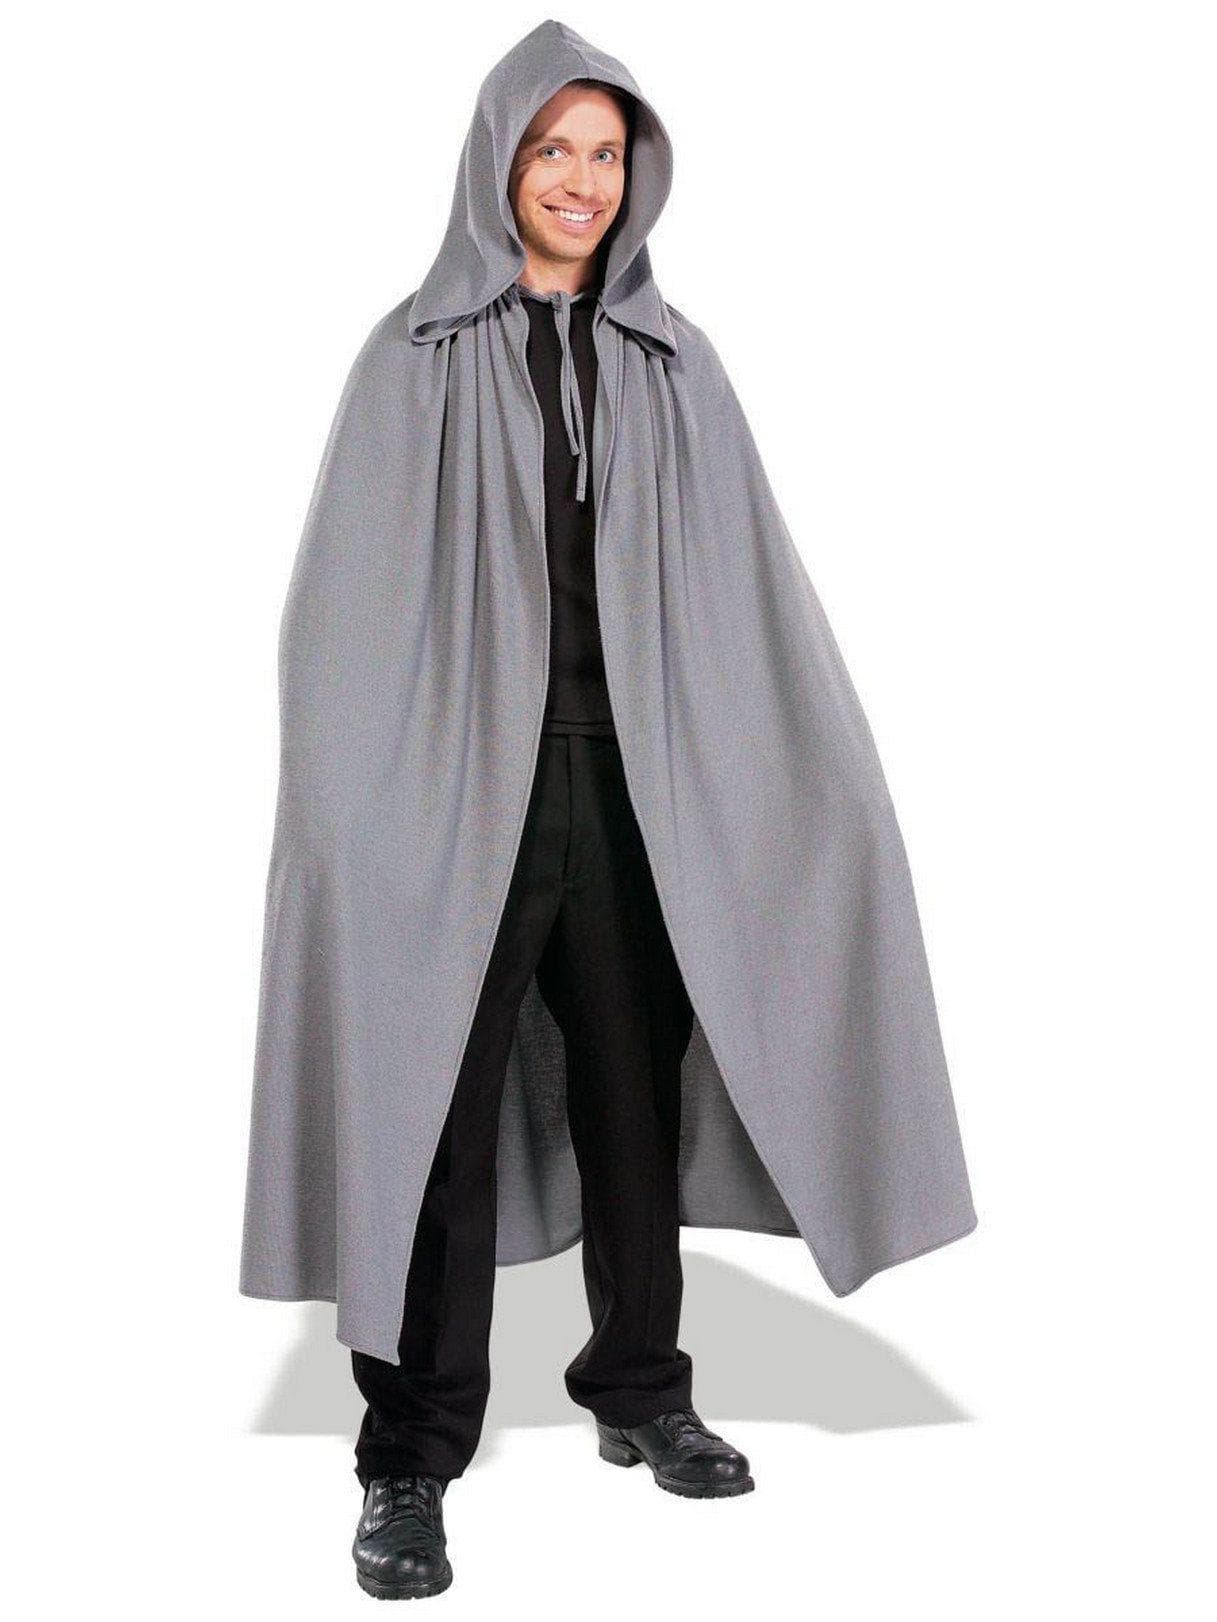 The Lord of the Rings: Gray Elven Cloak